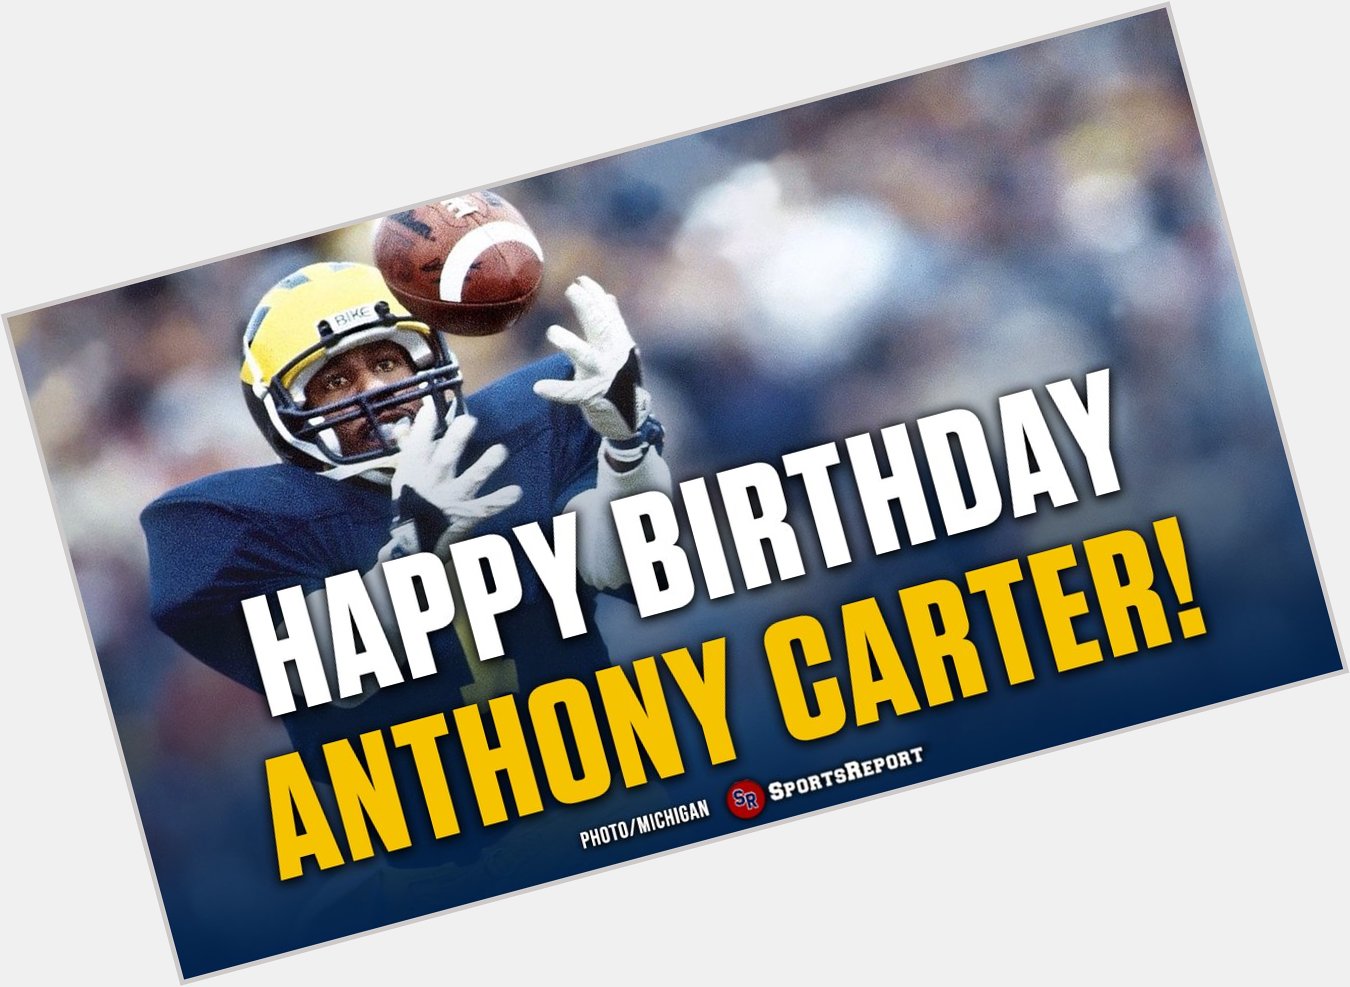  Fans, let\s wish legend Anthony Carter a Happy Birthday! 